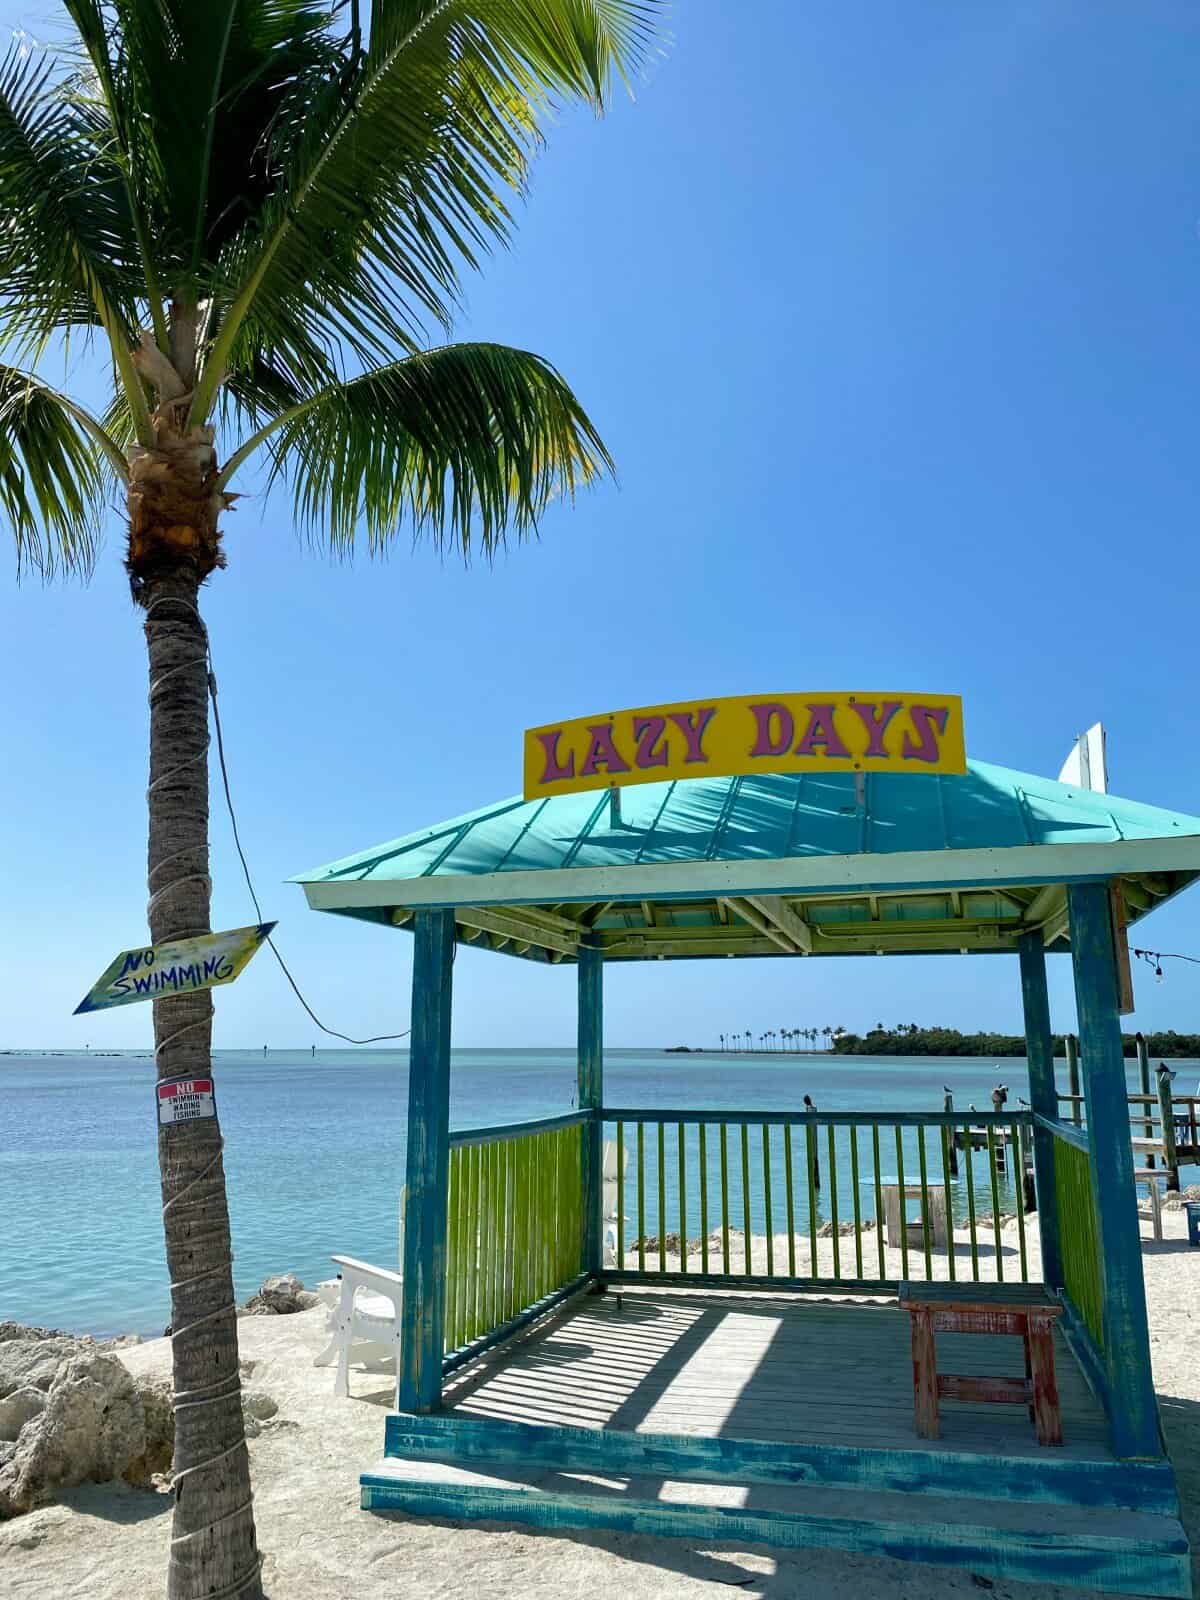 Planning a Florida Keys road trip itinerary - what to do in the Florida Keys - pay a visit to Lazy Days